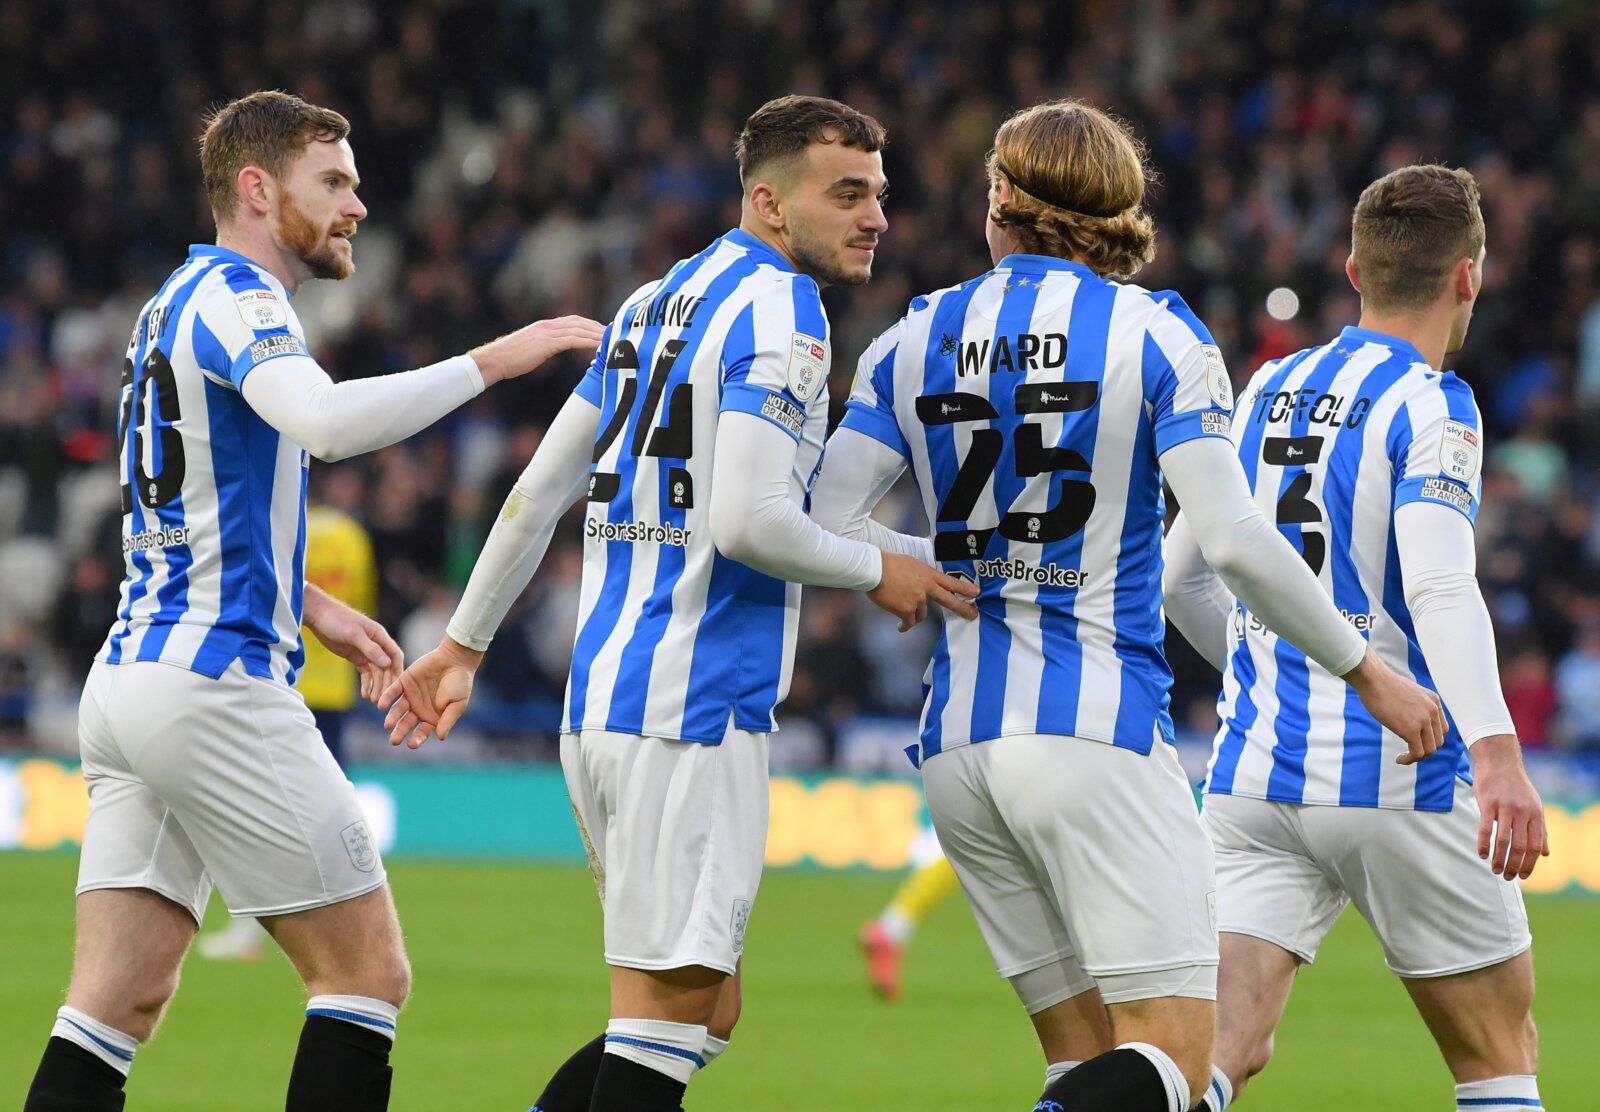 Soccer Football - Championship - Huddersfield Town v West Bromwich Albion - John Smith's Stadium, Huddersfield, Britain - November 20, 2021 Huddersfield Town's Danel Sinani celebrates scoring their first goal with teammates  Paul Burrows/Action Images